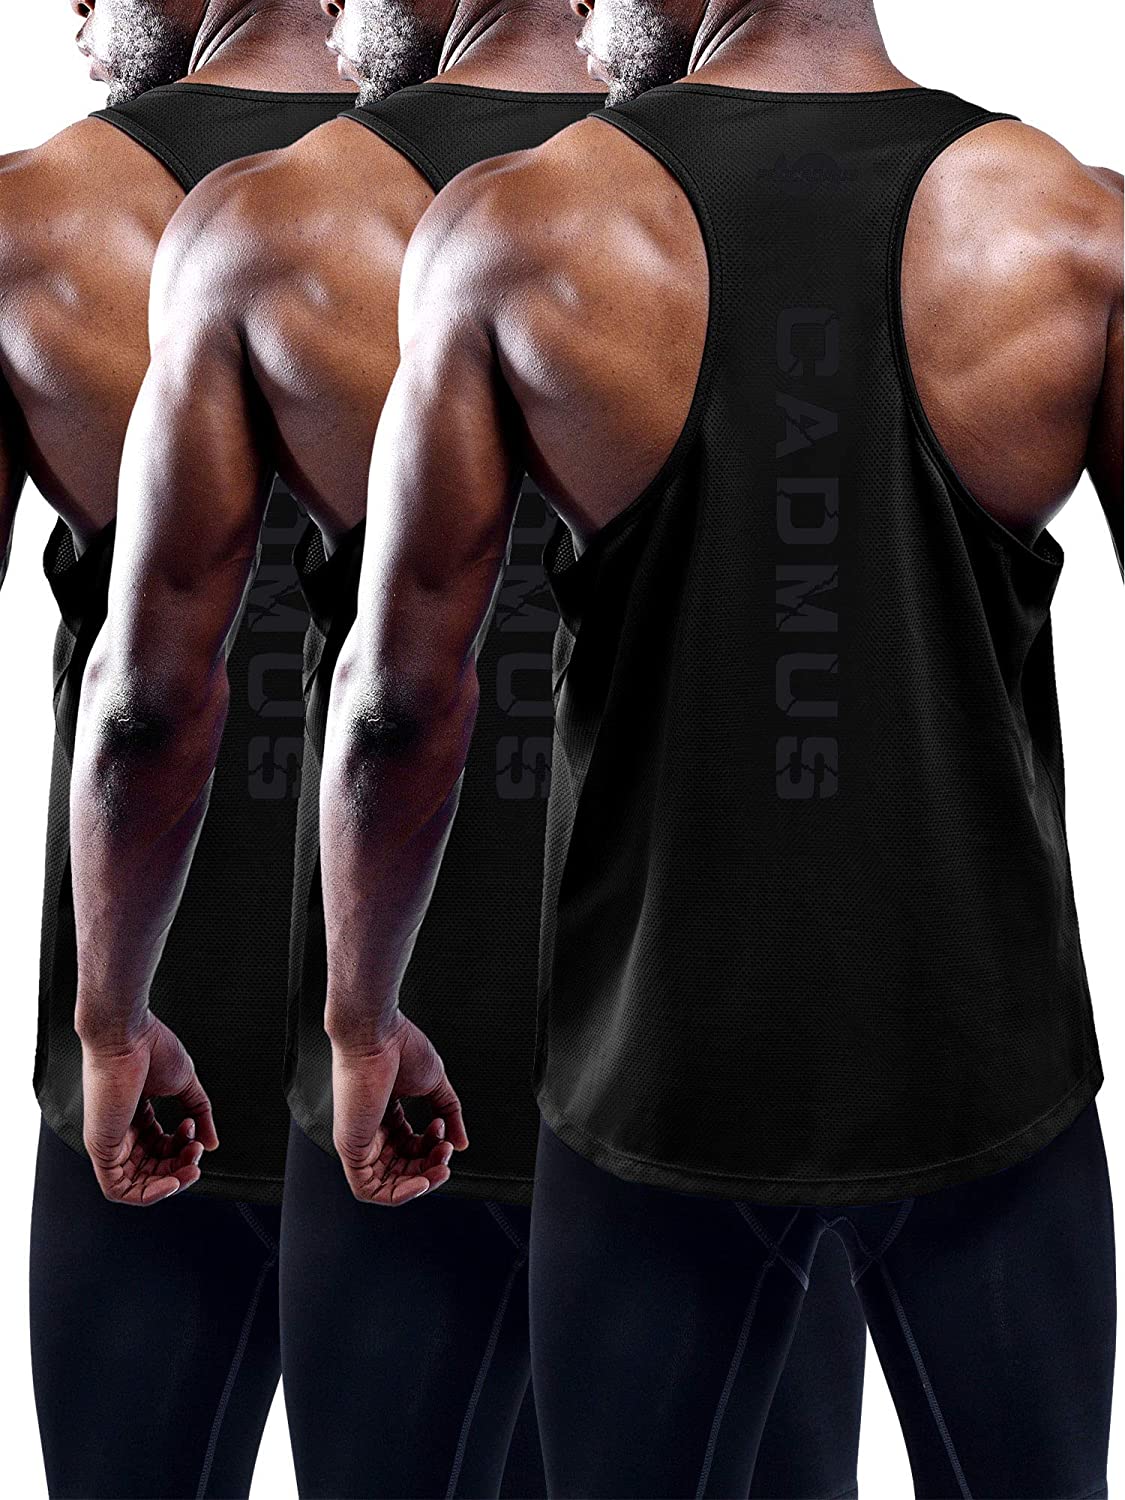 Cadmus Mens Dri Fit Workout Shirts with Hoods